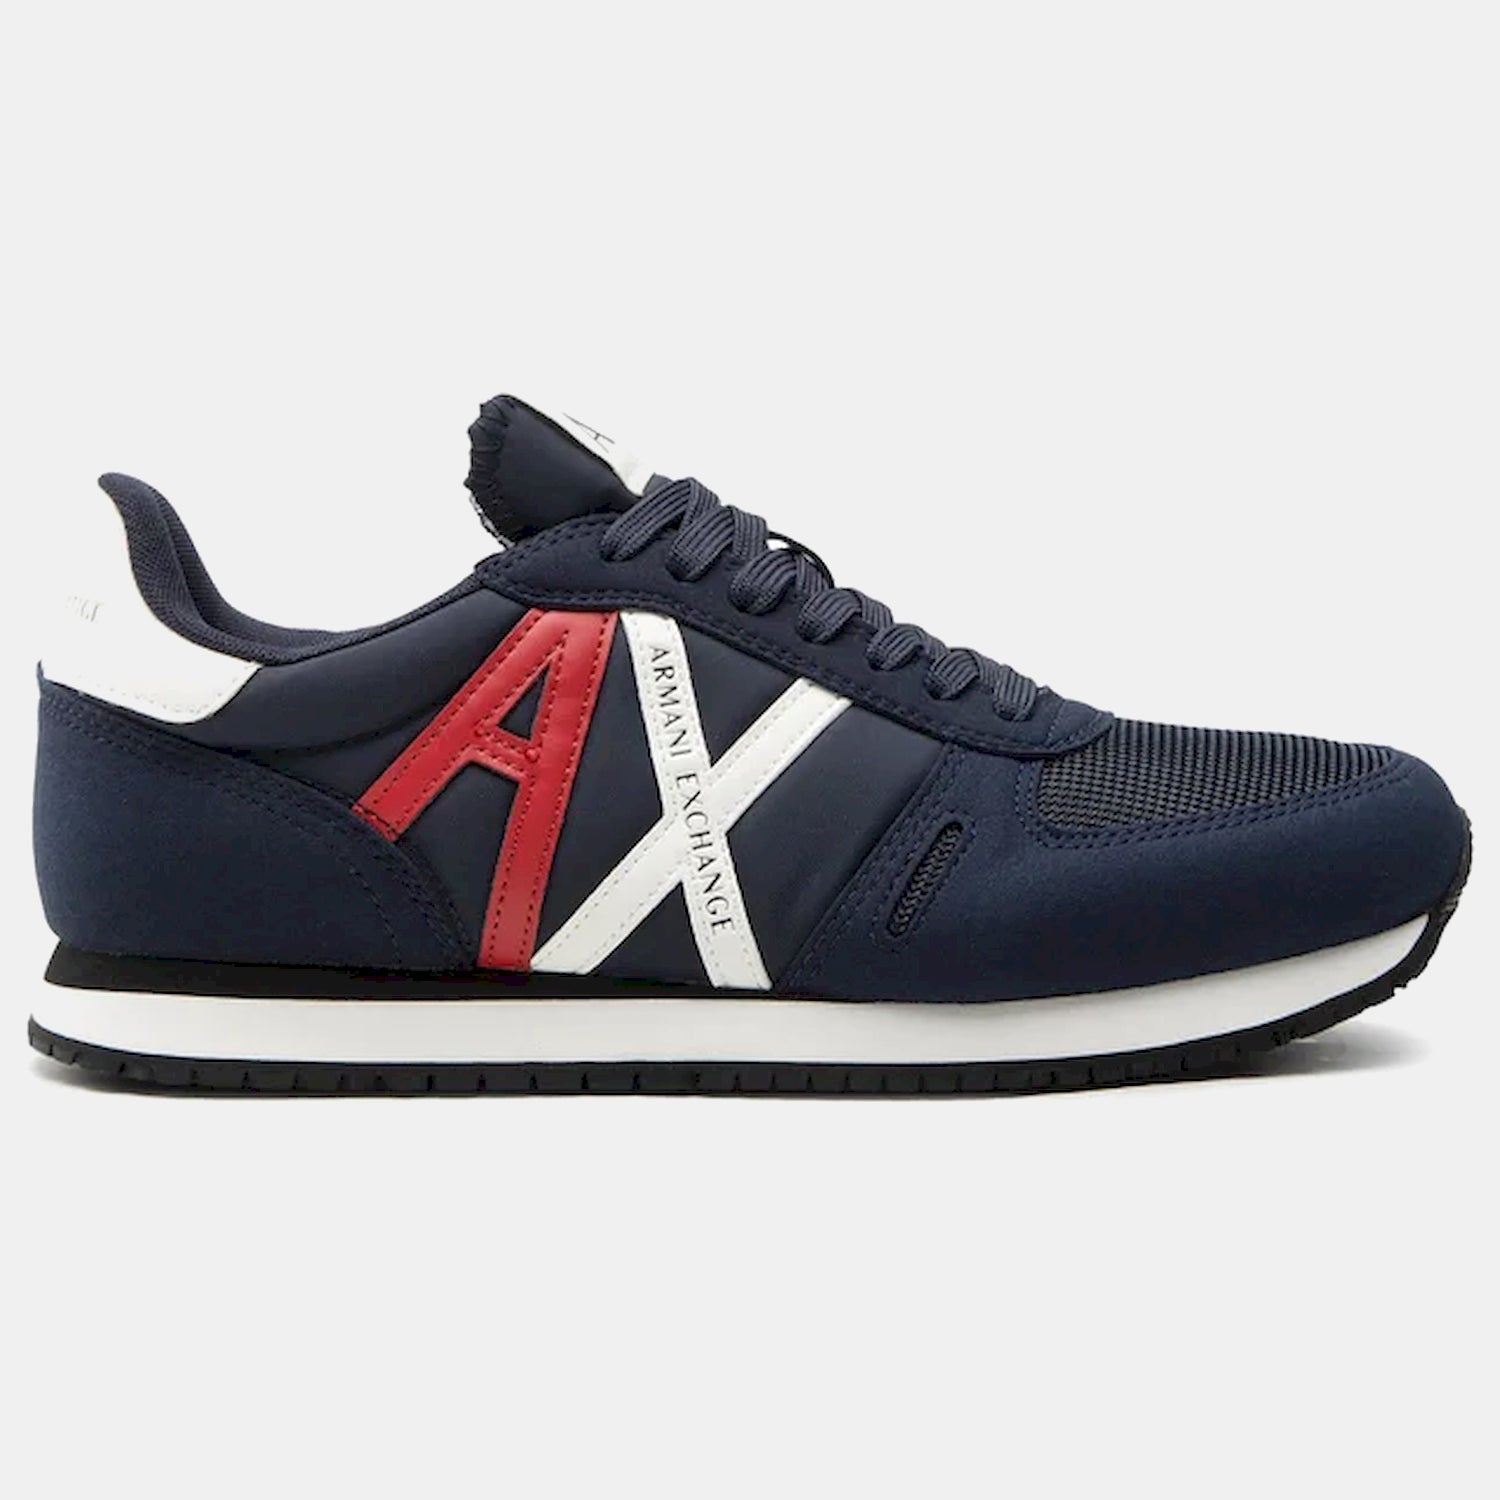 Armani Exchange Sapatilhas Sneakers Shoes Xux017 Xv028 Navy Red Navy Vermelho_shot1